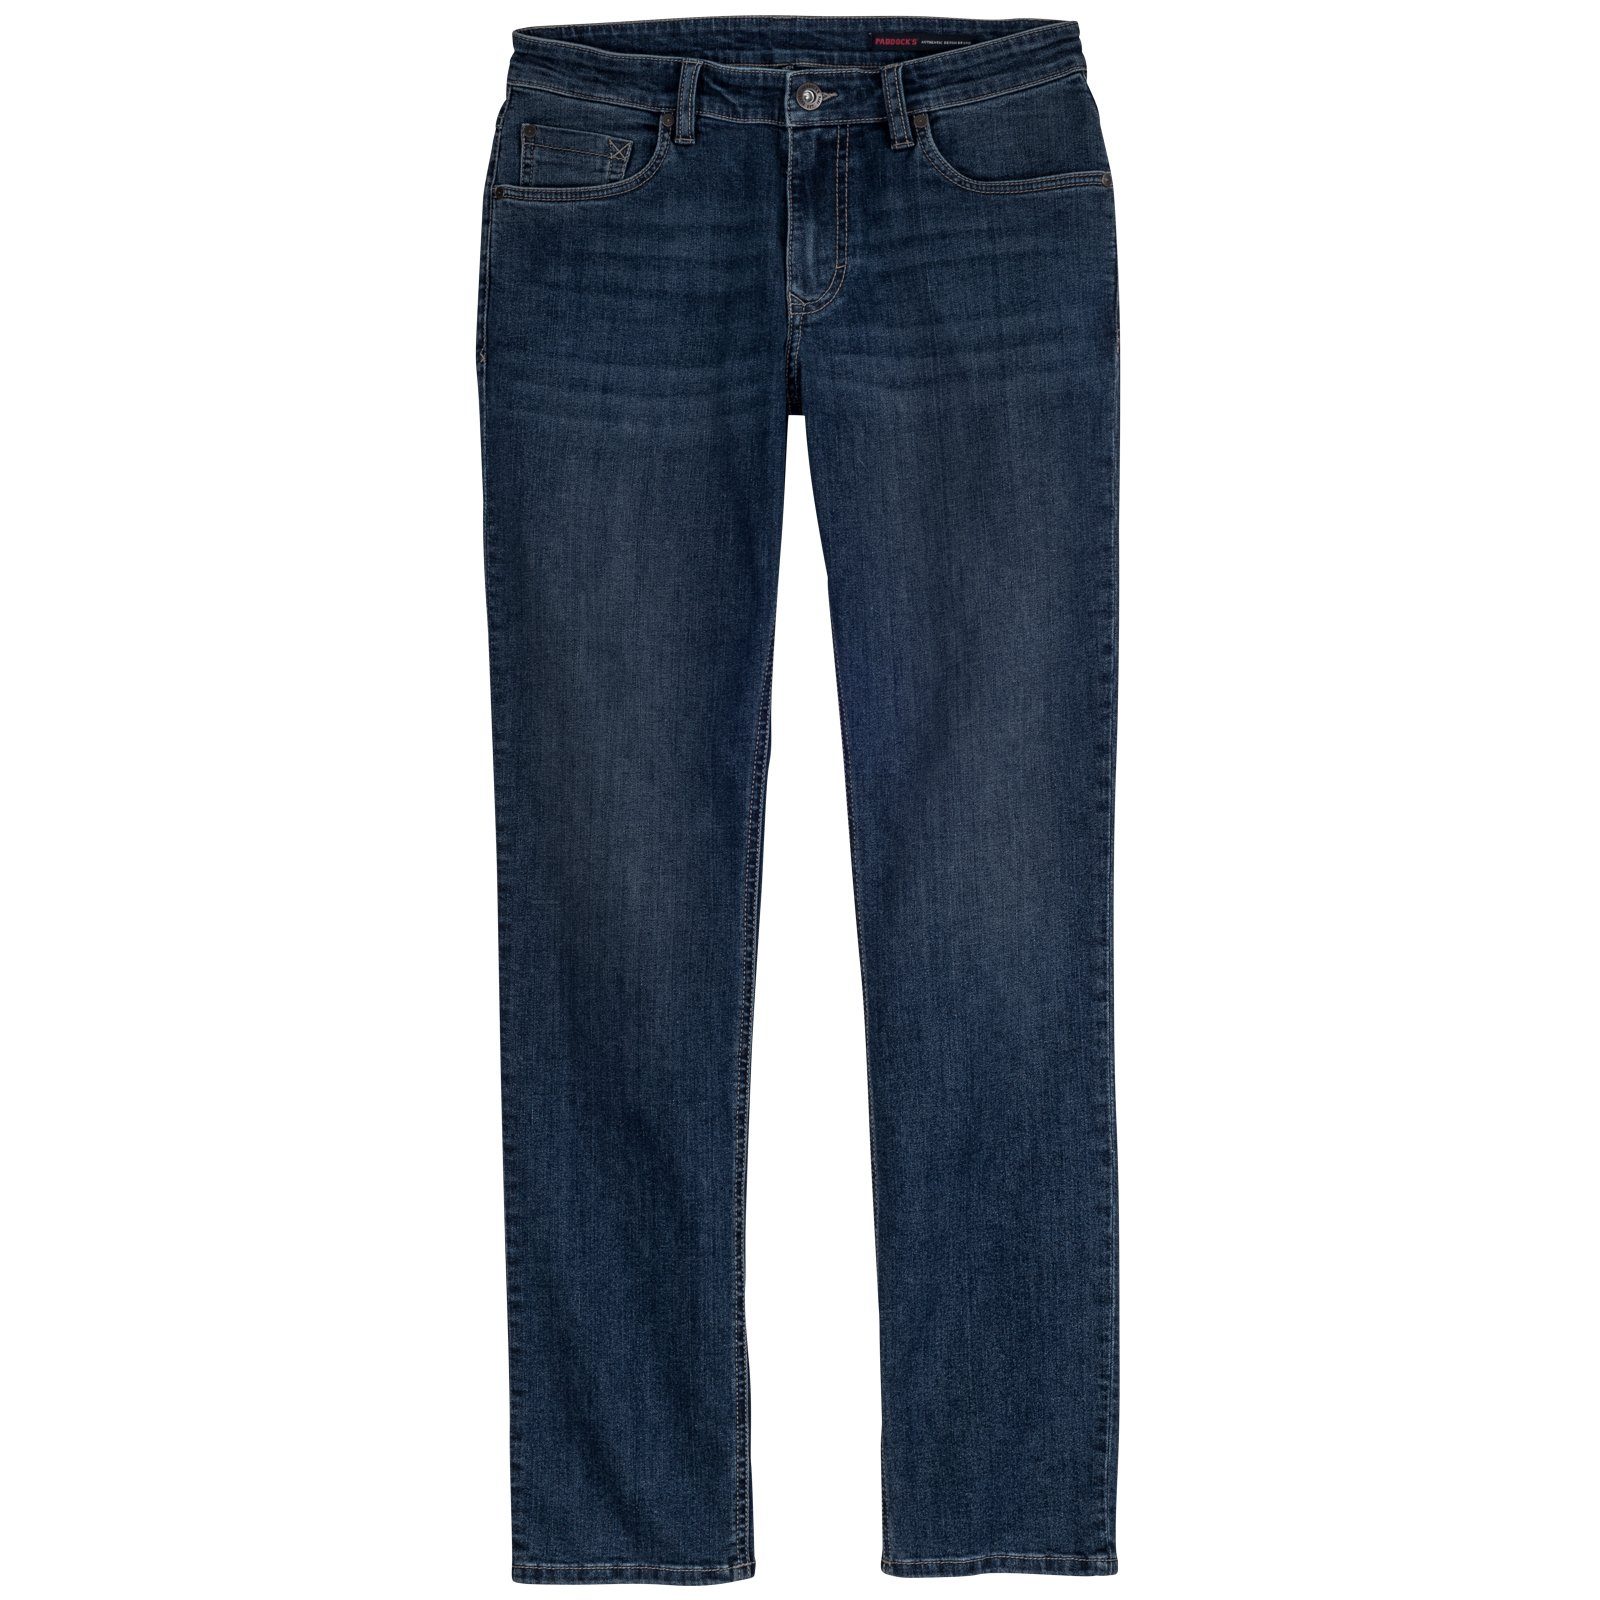 Paddock's Bequeme Jeans Paddock's XXL Jeans Ben blue rinse use moustache